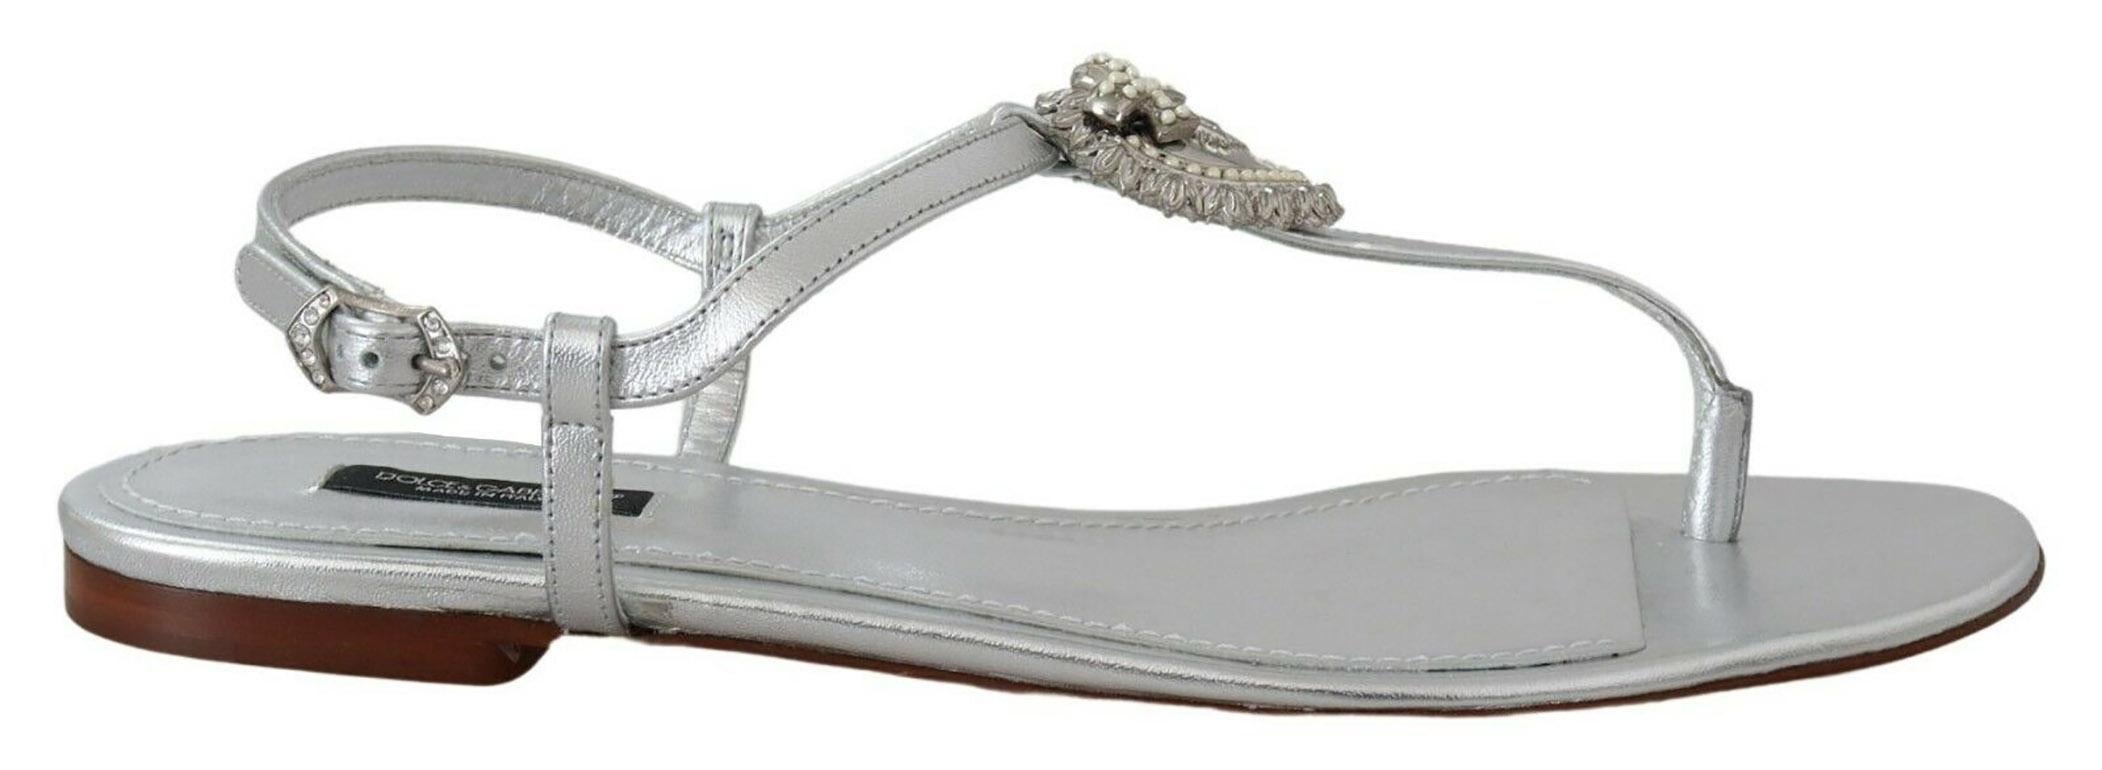 Gorgeous brand new with tags, 100% Authentic Dolce & Gabbana Devotion flat thong sandals in silver-laminated nappa leather, adorned with handmade DG Sacred Heart with metal and pearl applications. Ankle strap with jewel buckle, leather lining,